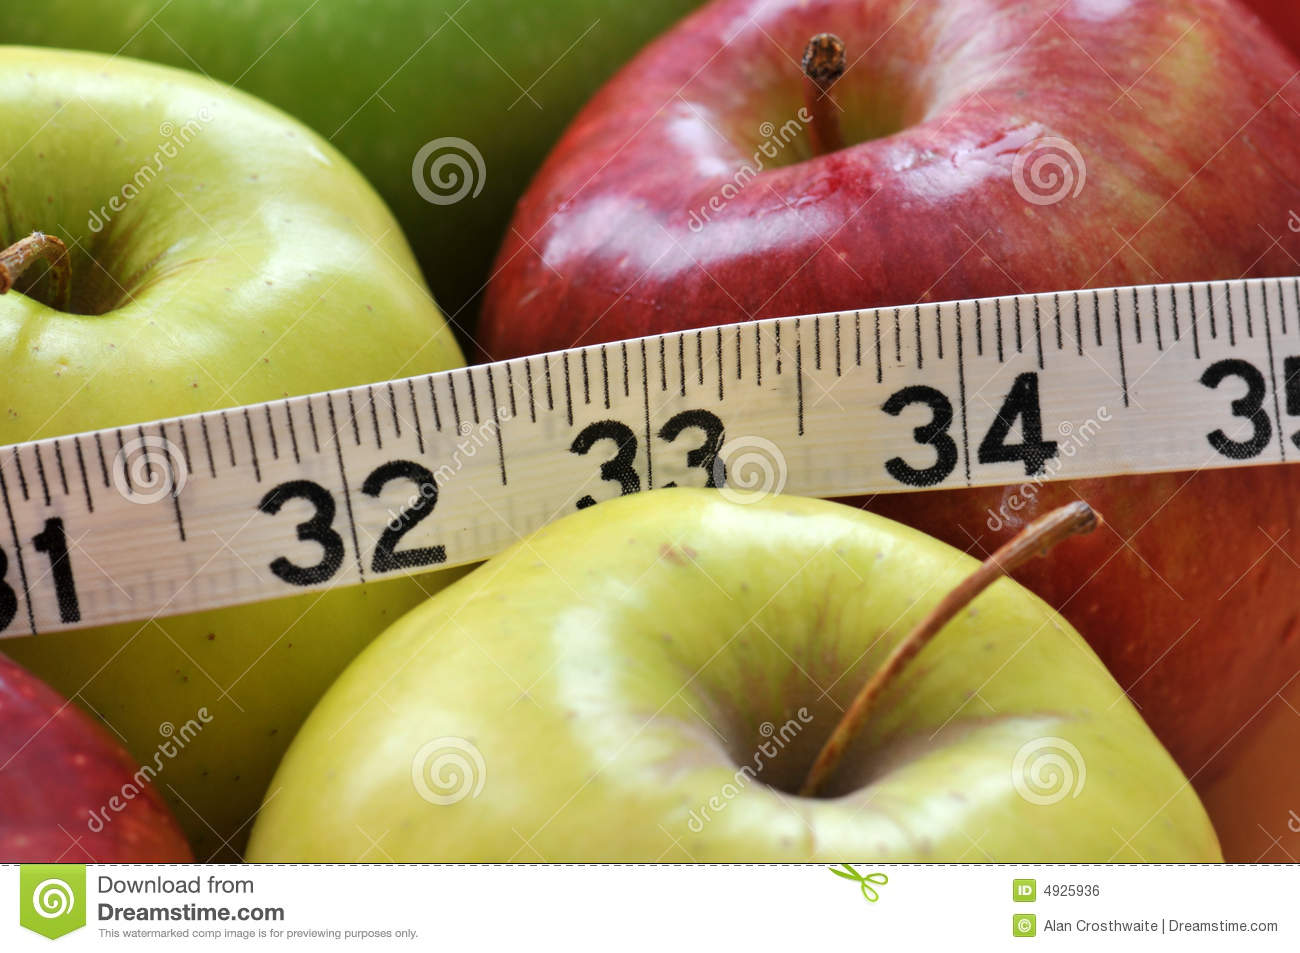 Healthy Choices Royalty Free Stock Image   Image  4925936